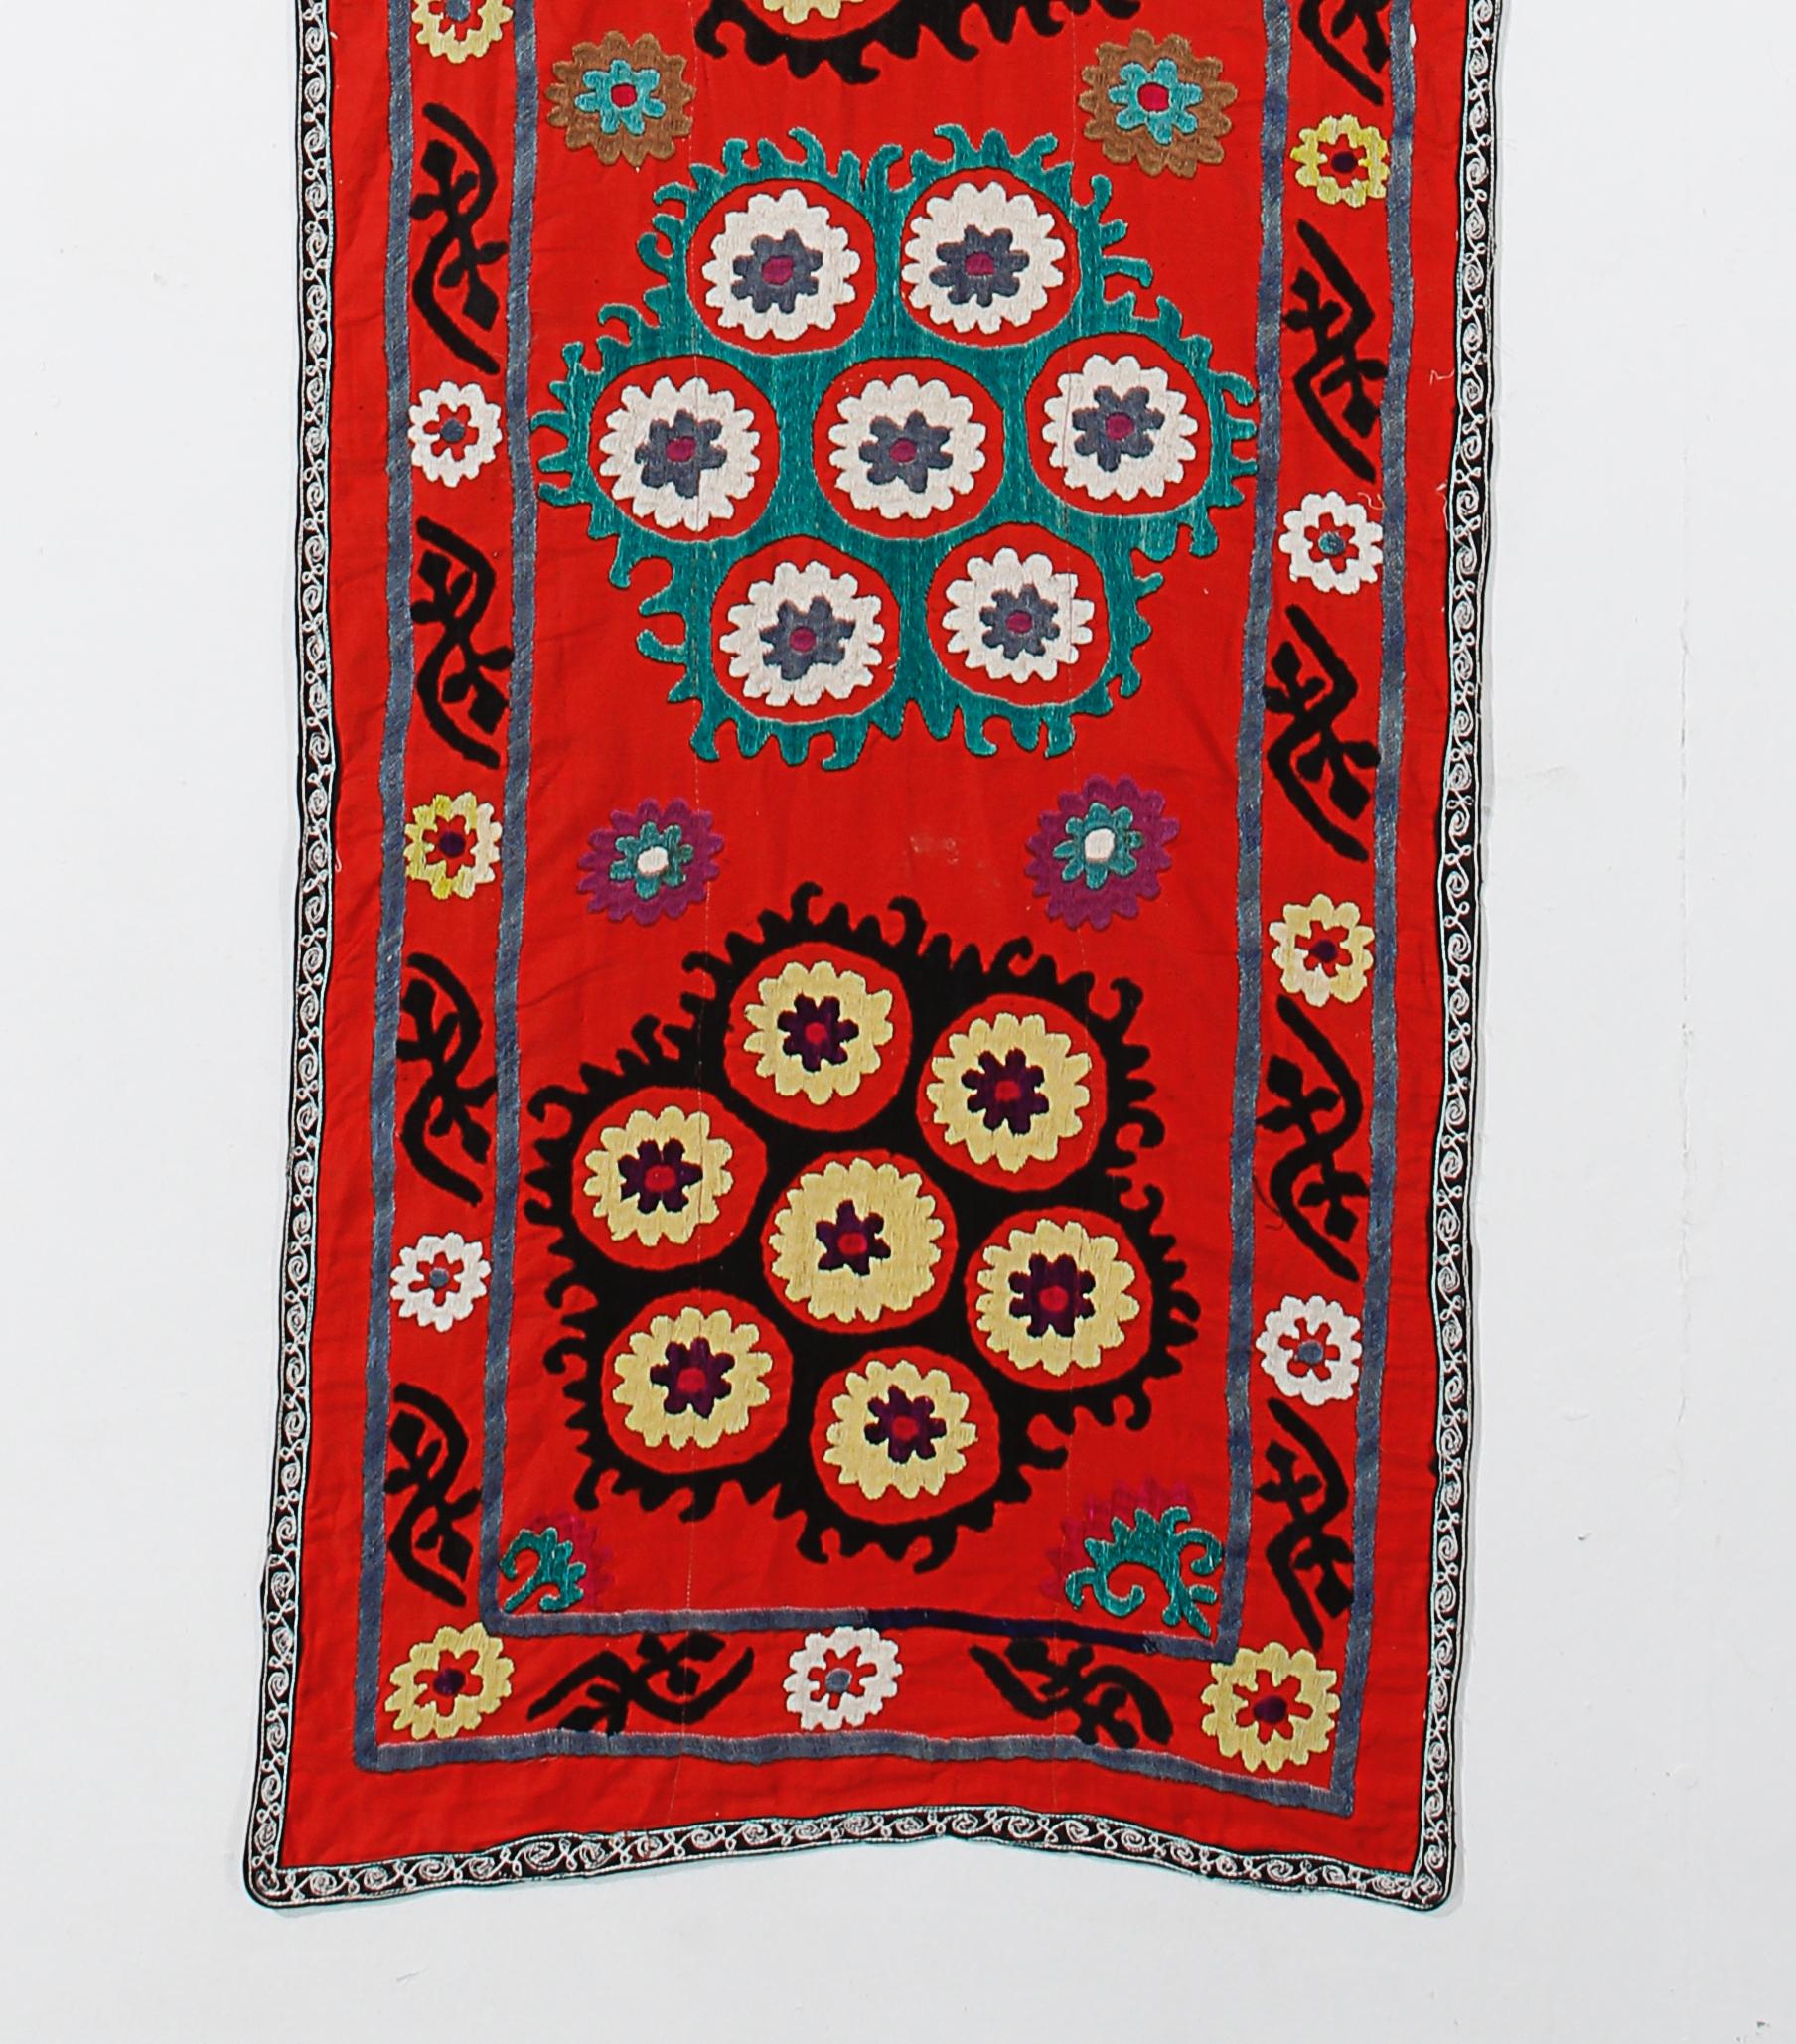 20th Century 1.9x12.4 ft Silk Embroidery Red Table Runner, Uzbek Suzani Fabric Wall Hanging For Sale